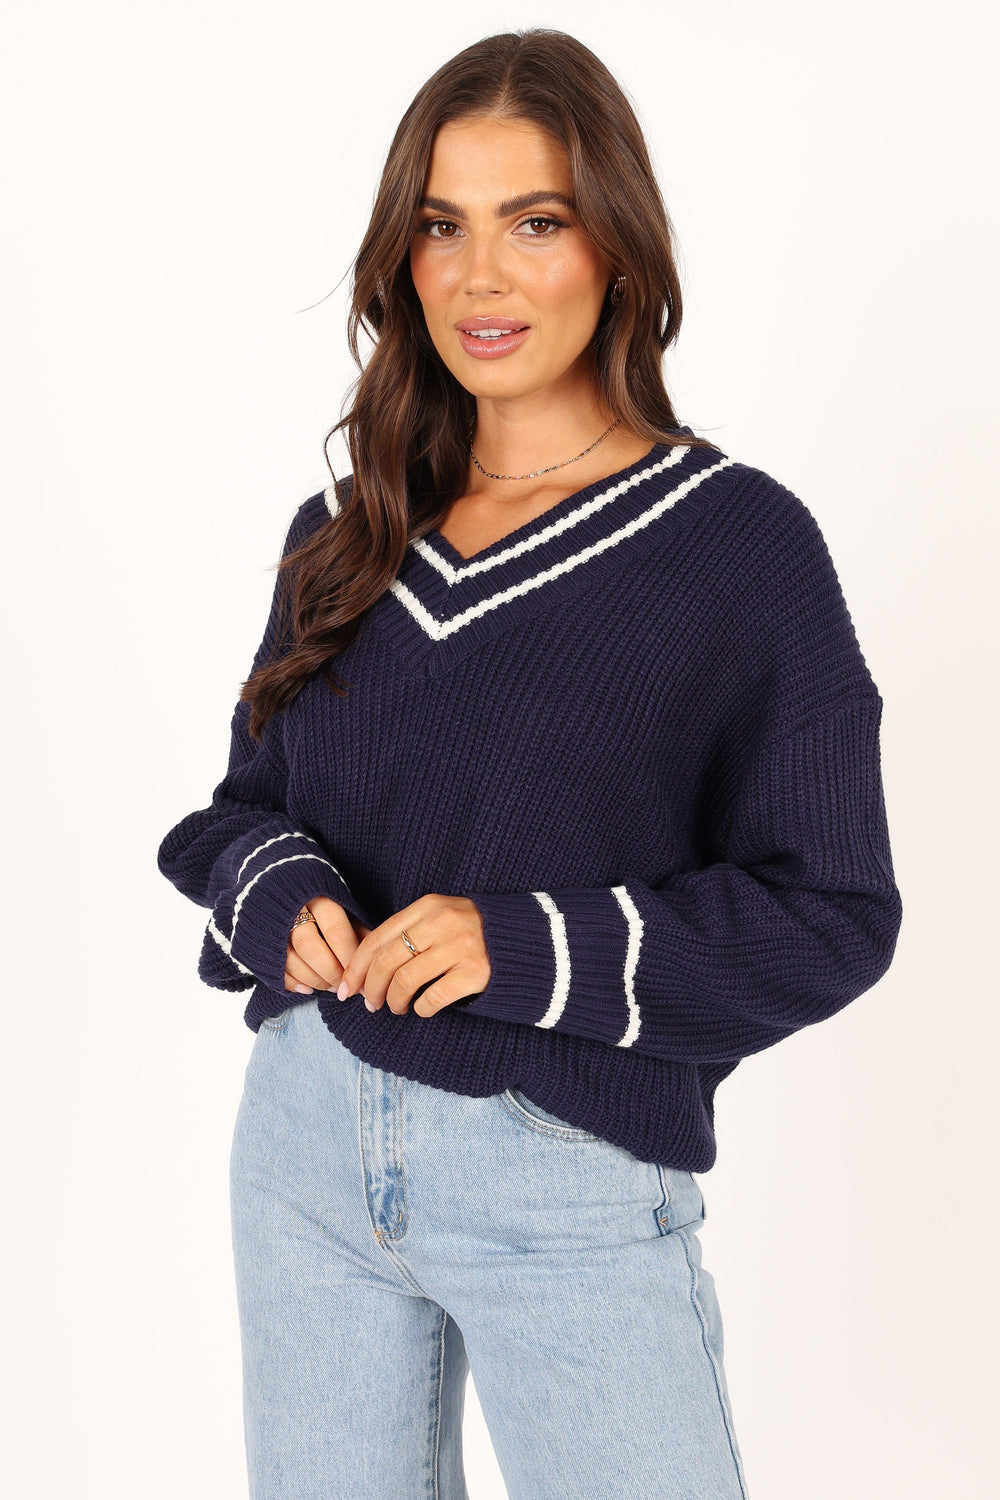 Petal and Pup USA KNITWEAR Leanna Vneck Knit Sweater - Navy